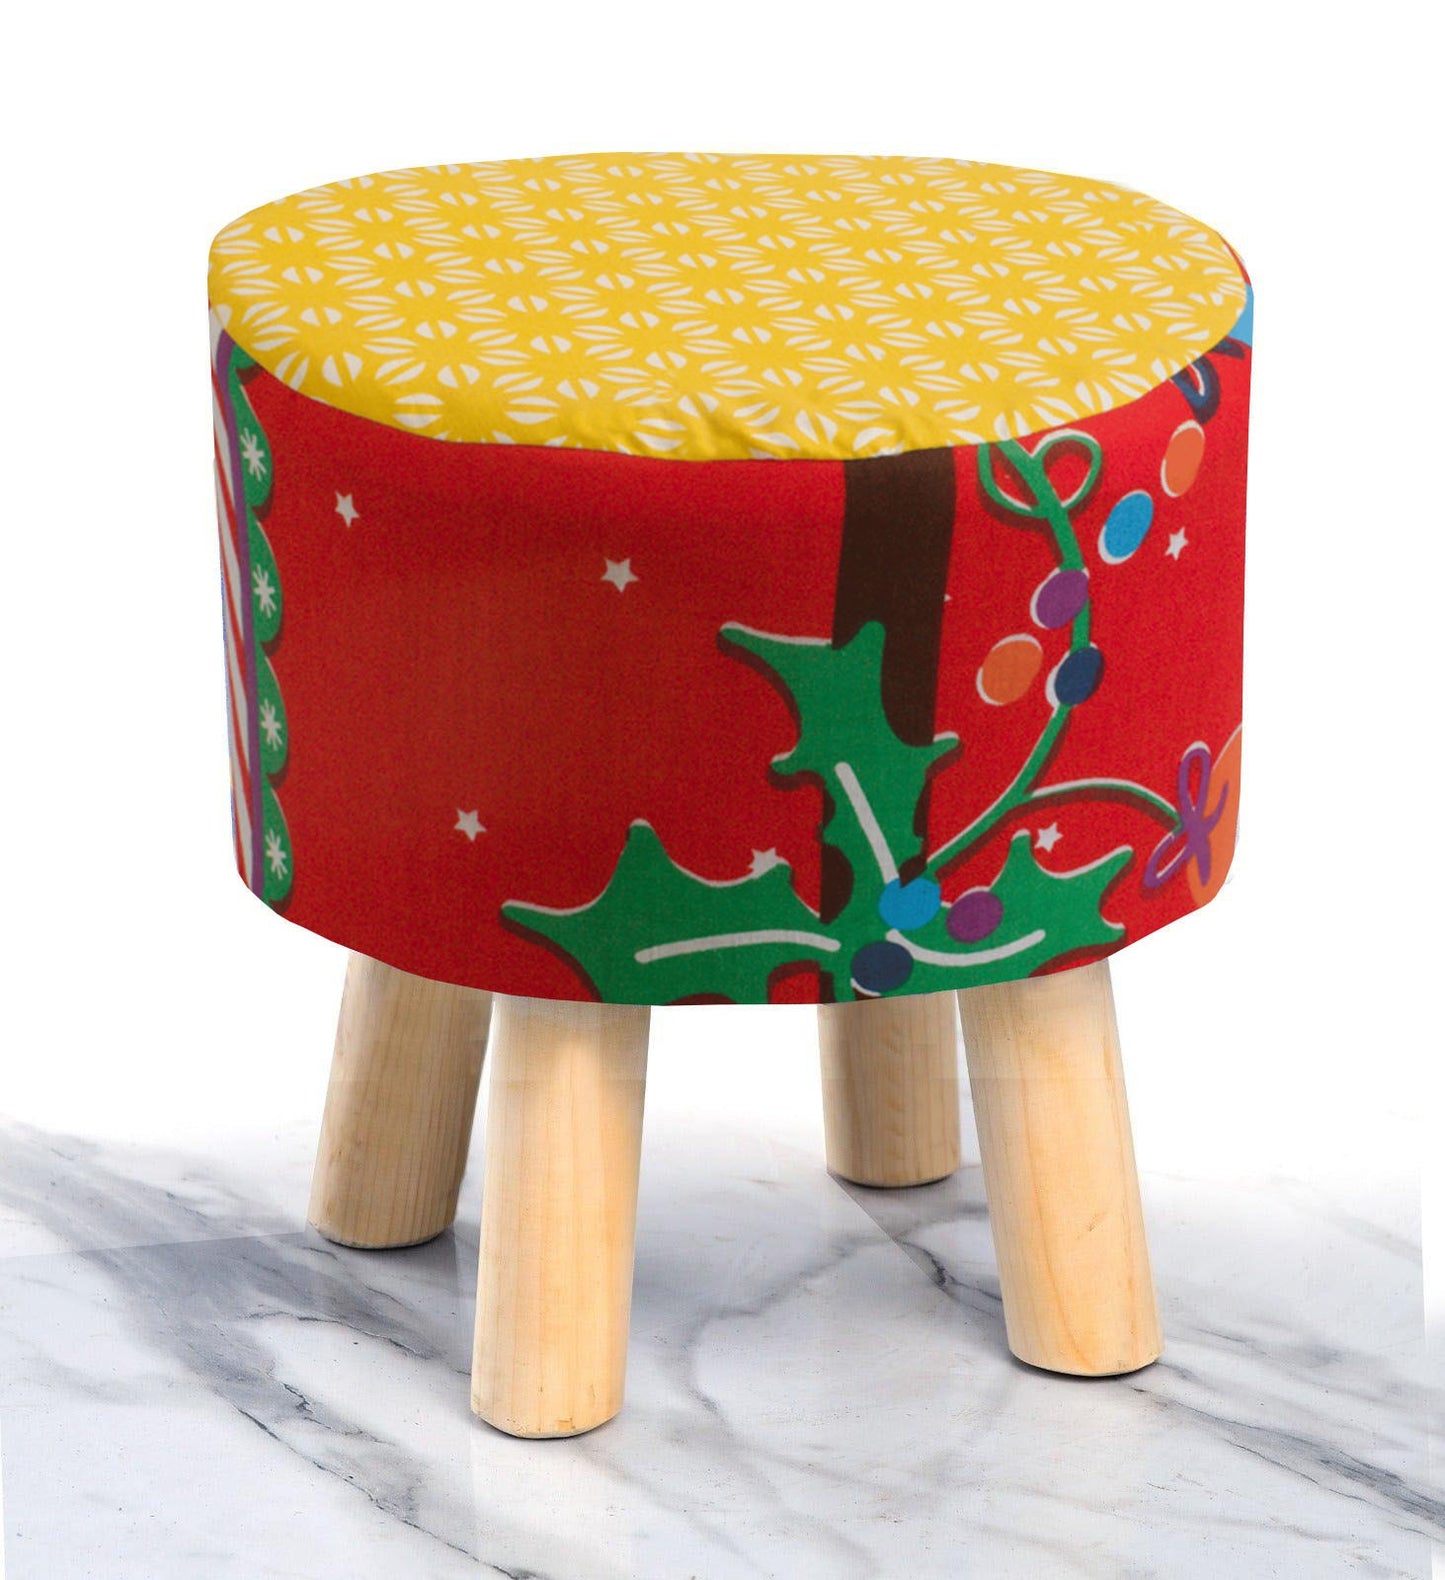 Wooden stool Printed Round Shape- 1349